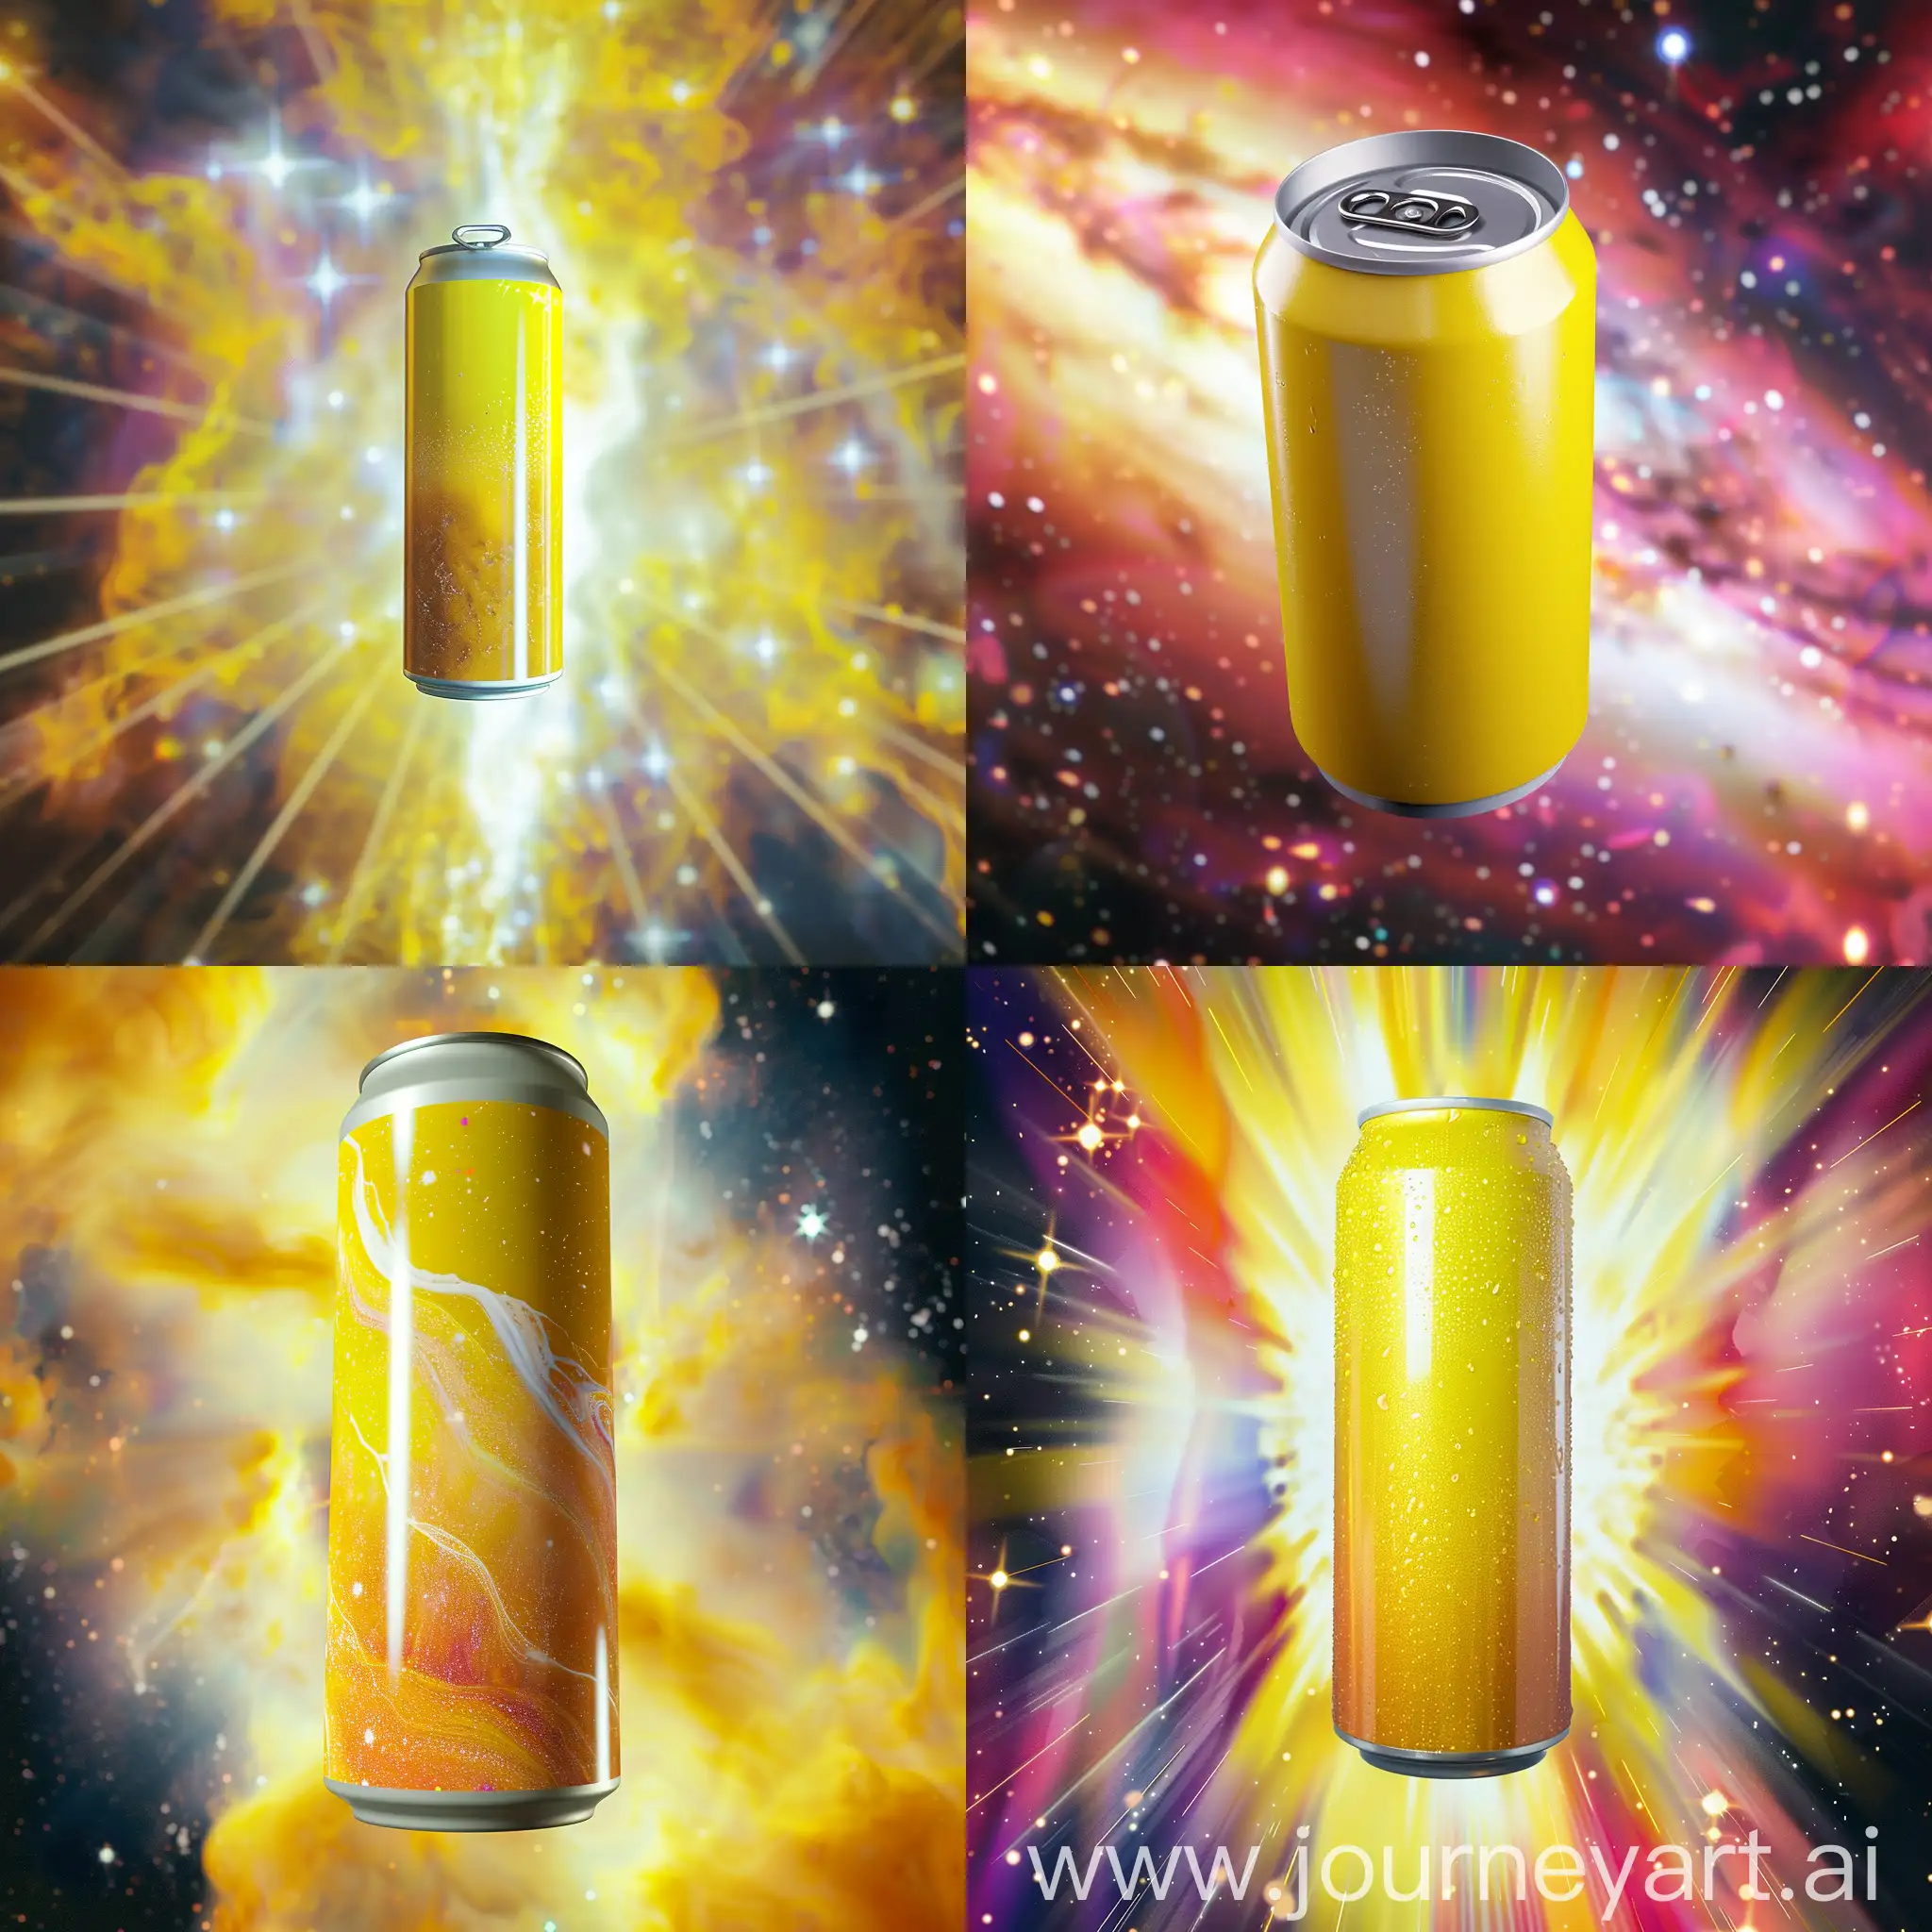 Bright-Yellow-Energizing-Drink-Suspended-in-Energetic-Space